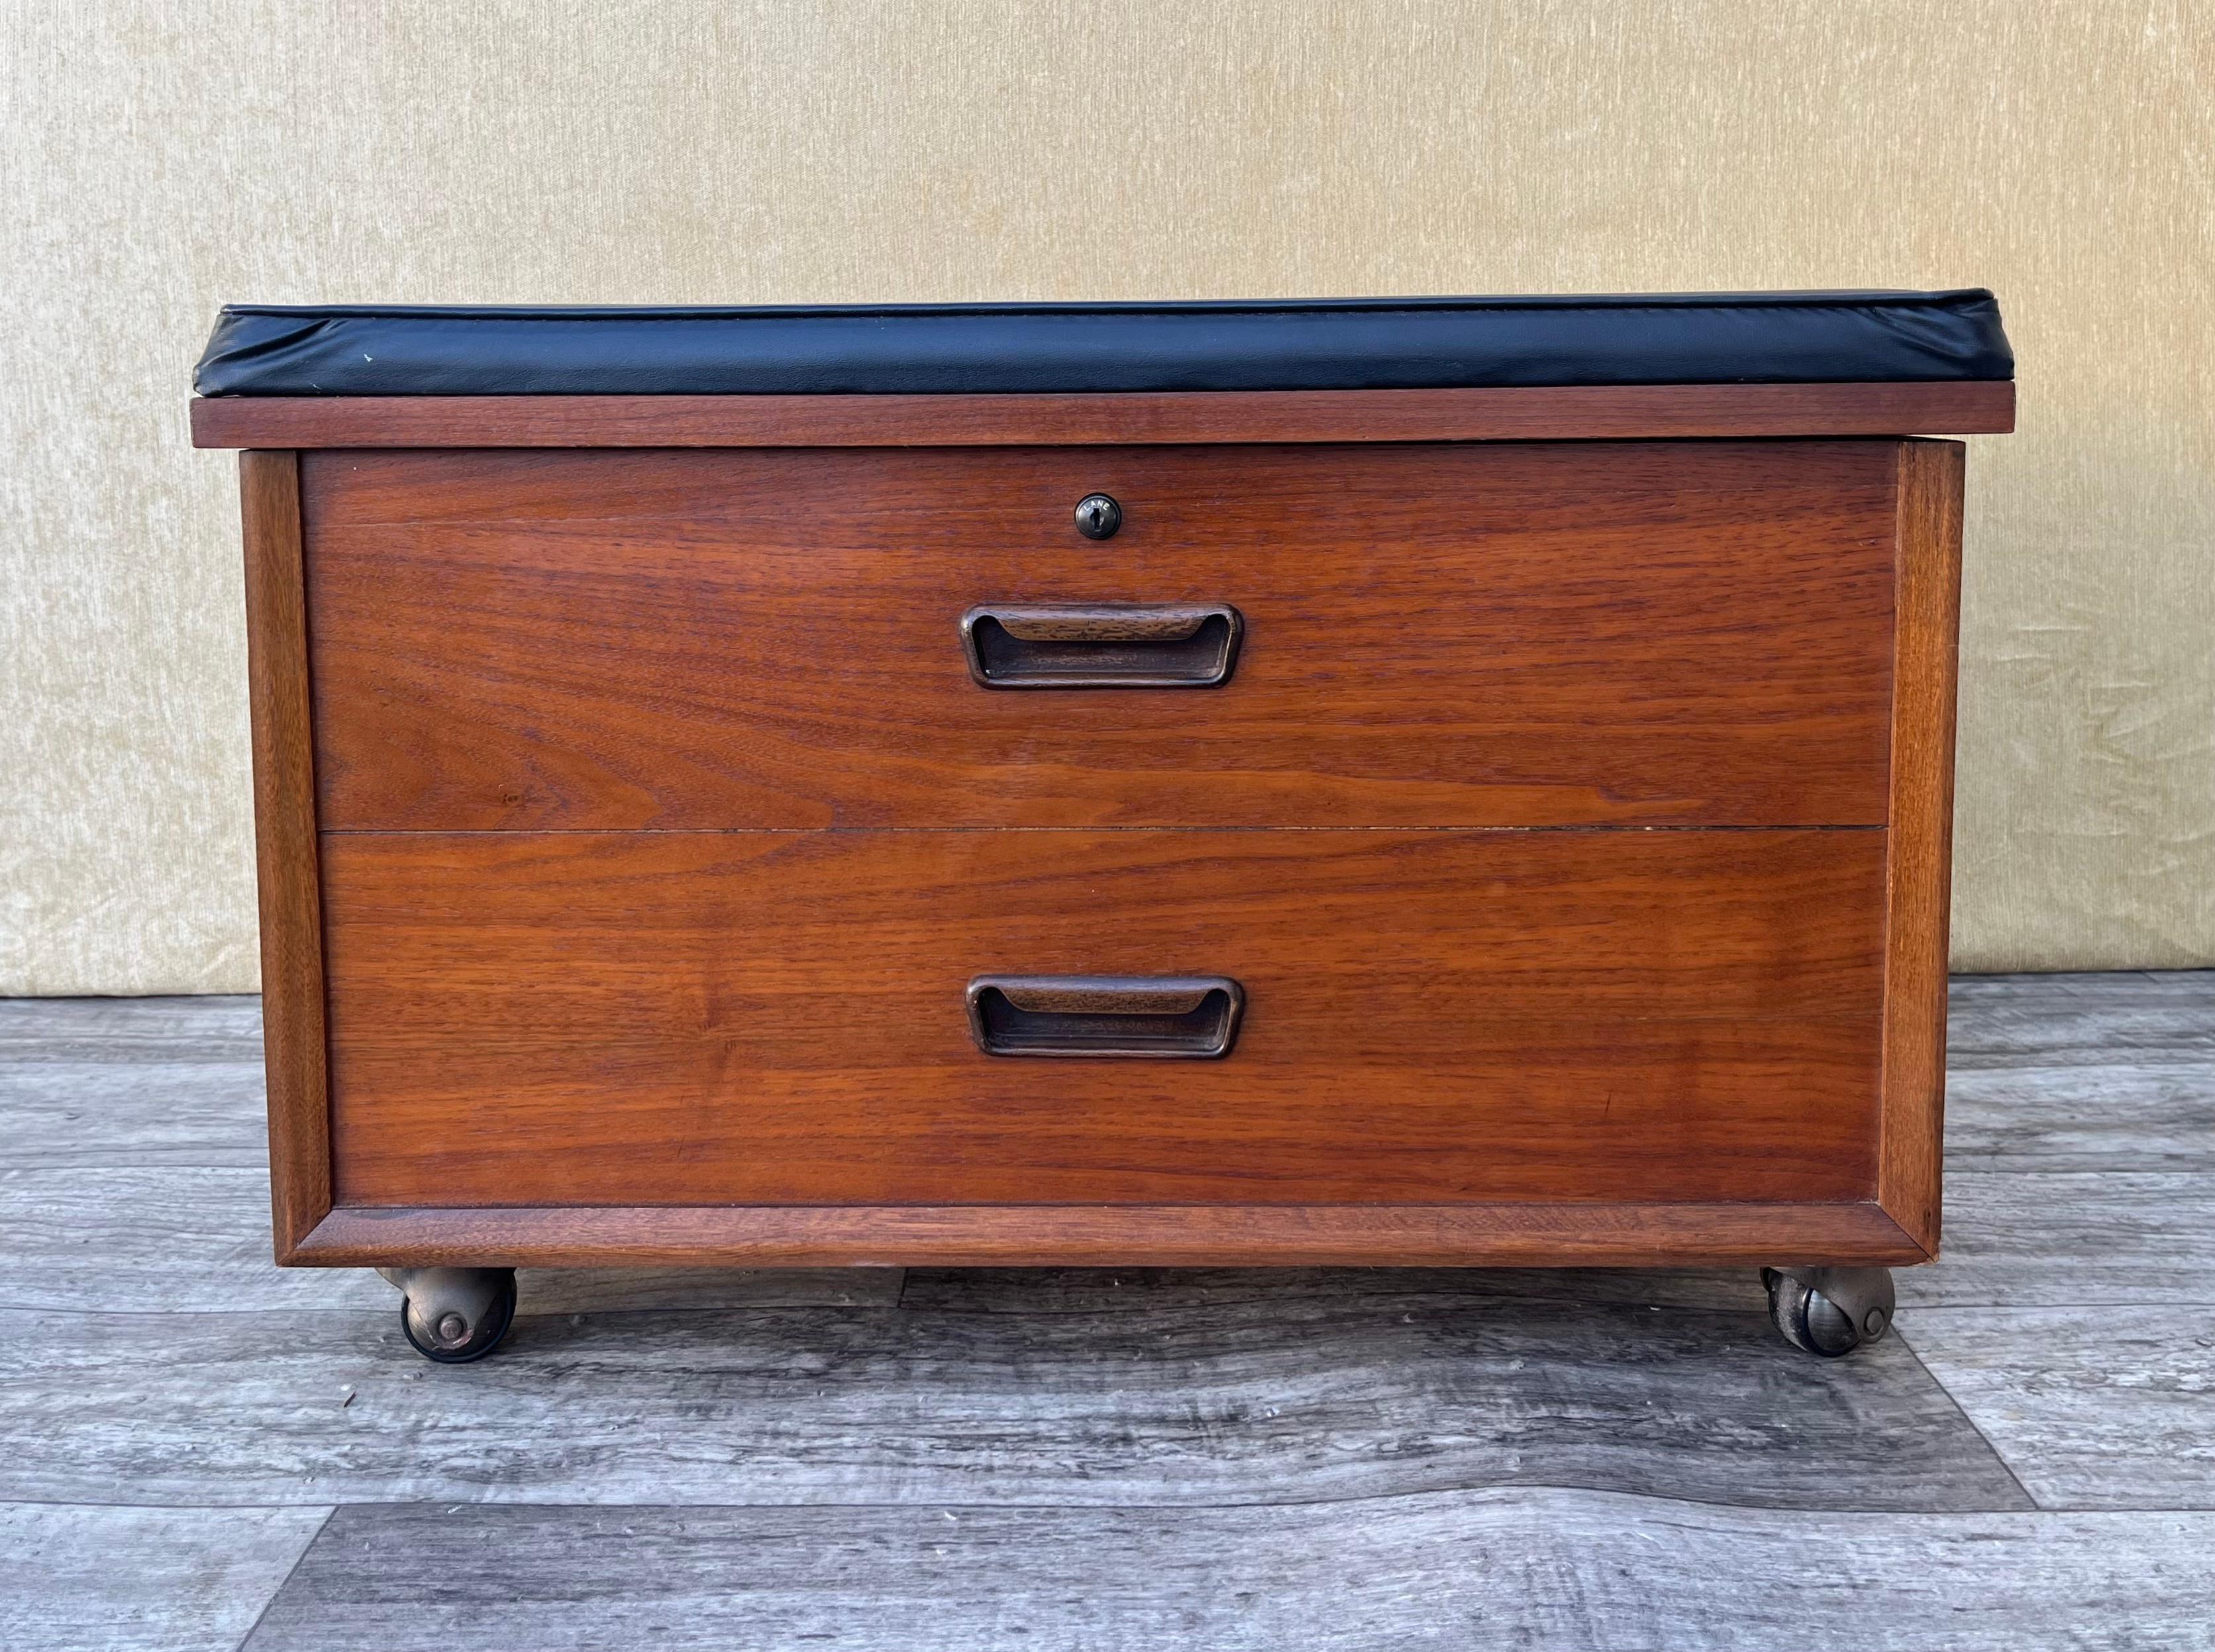 Vintage Mid Century Modern Lane Rolling Record Storage Bench. Circa 1970s. 
Features a beautiful walnut wood grain, two from faux drawers, the original black vinyl upholstery, and casters for easy mobility.
In good original condition with signs of